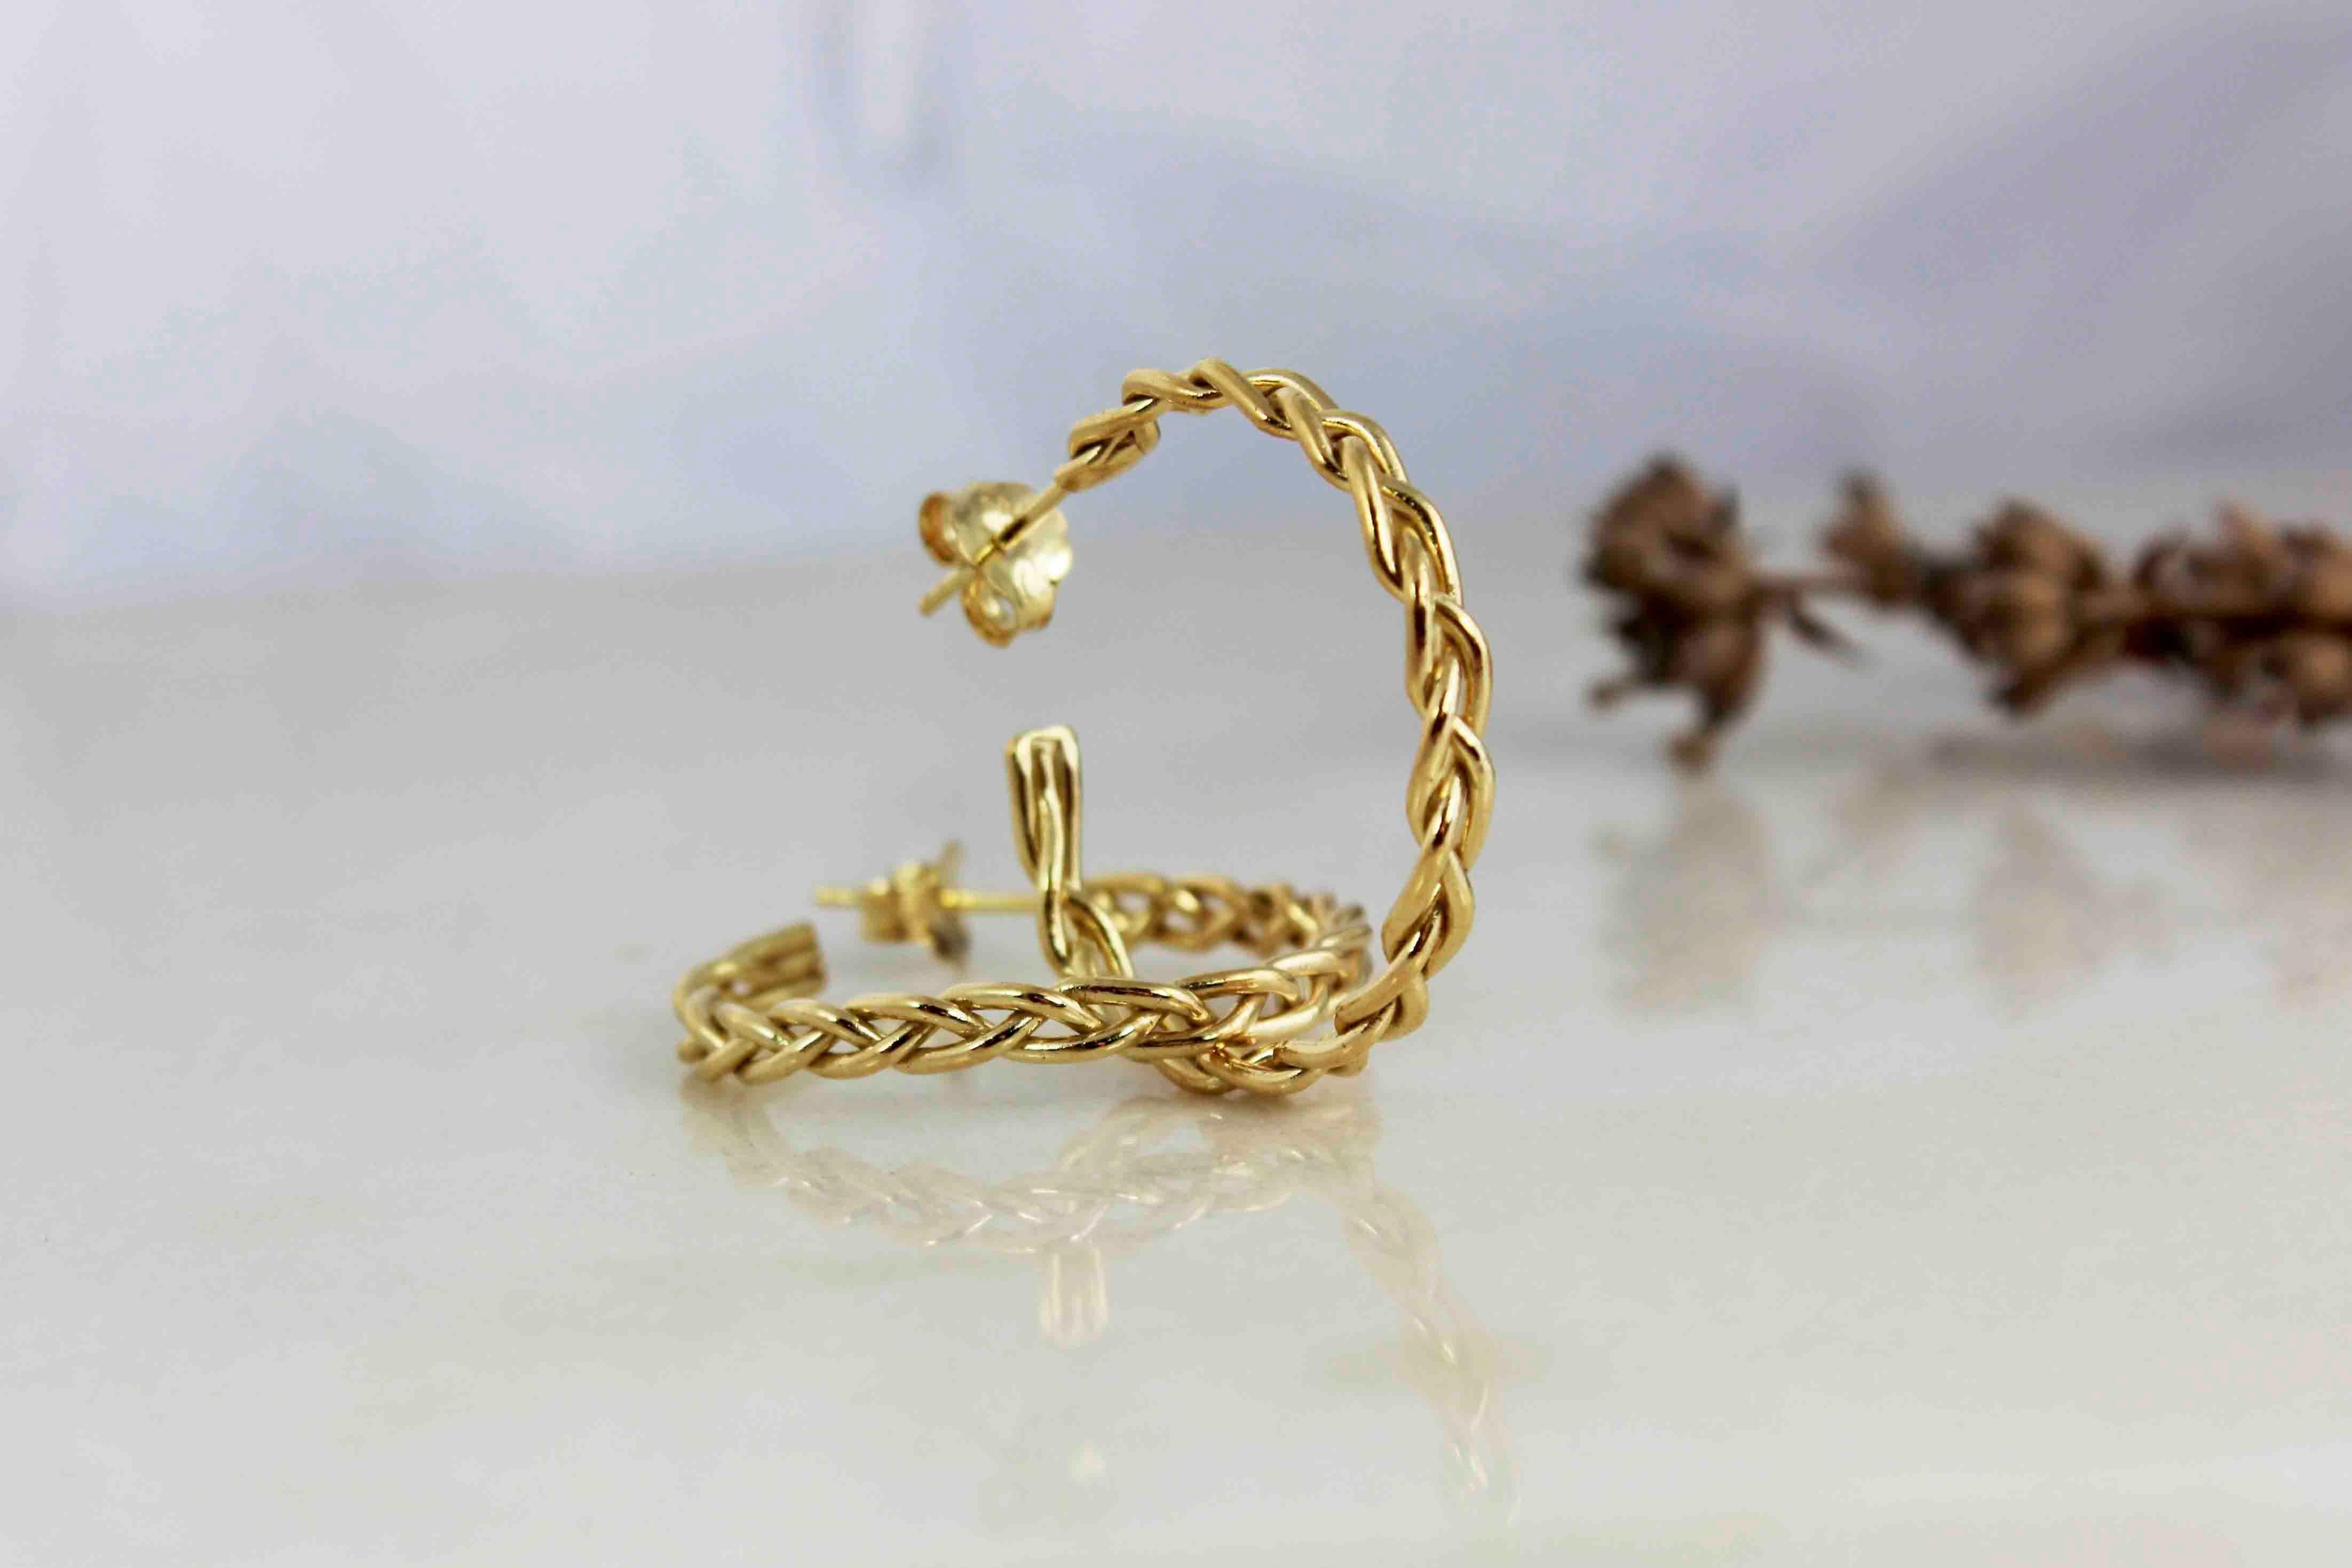 This is an alternative to the ordinary hoops, the Braided Hoop Earrings made from 9K yellow gold.

They could be perfect for any occasion.

Easy to wear, from day to night.